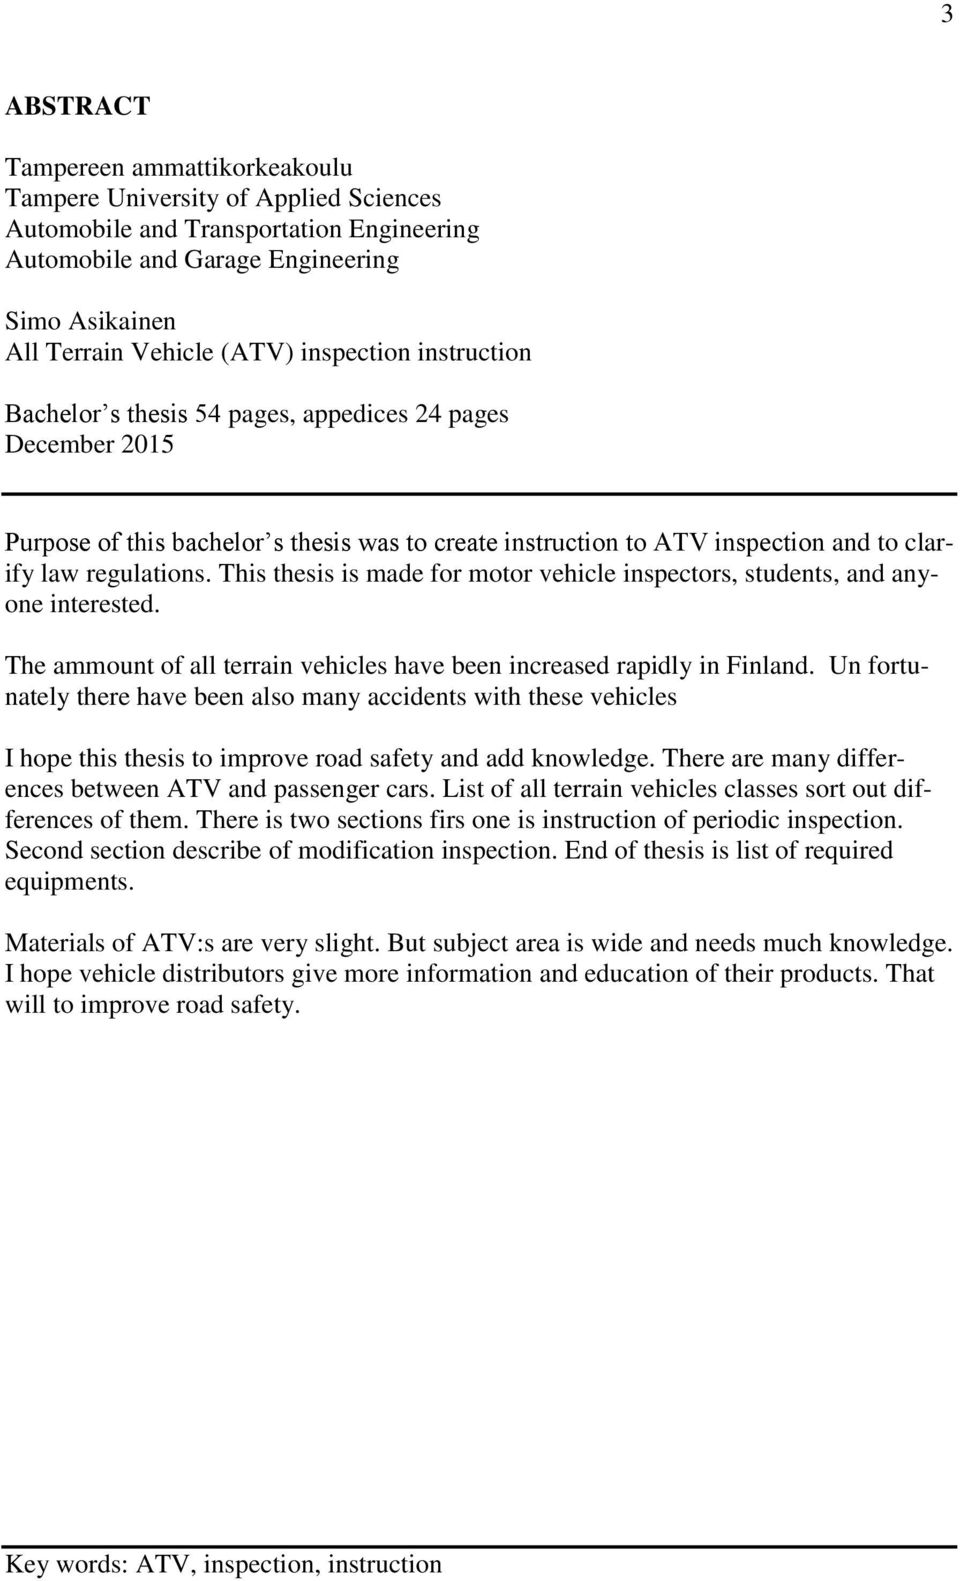 This thesis is made for motor vehicle inspectors, students, and anyone interested. The ammount of all terrain vehicles have been increased rapidly in Finland.